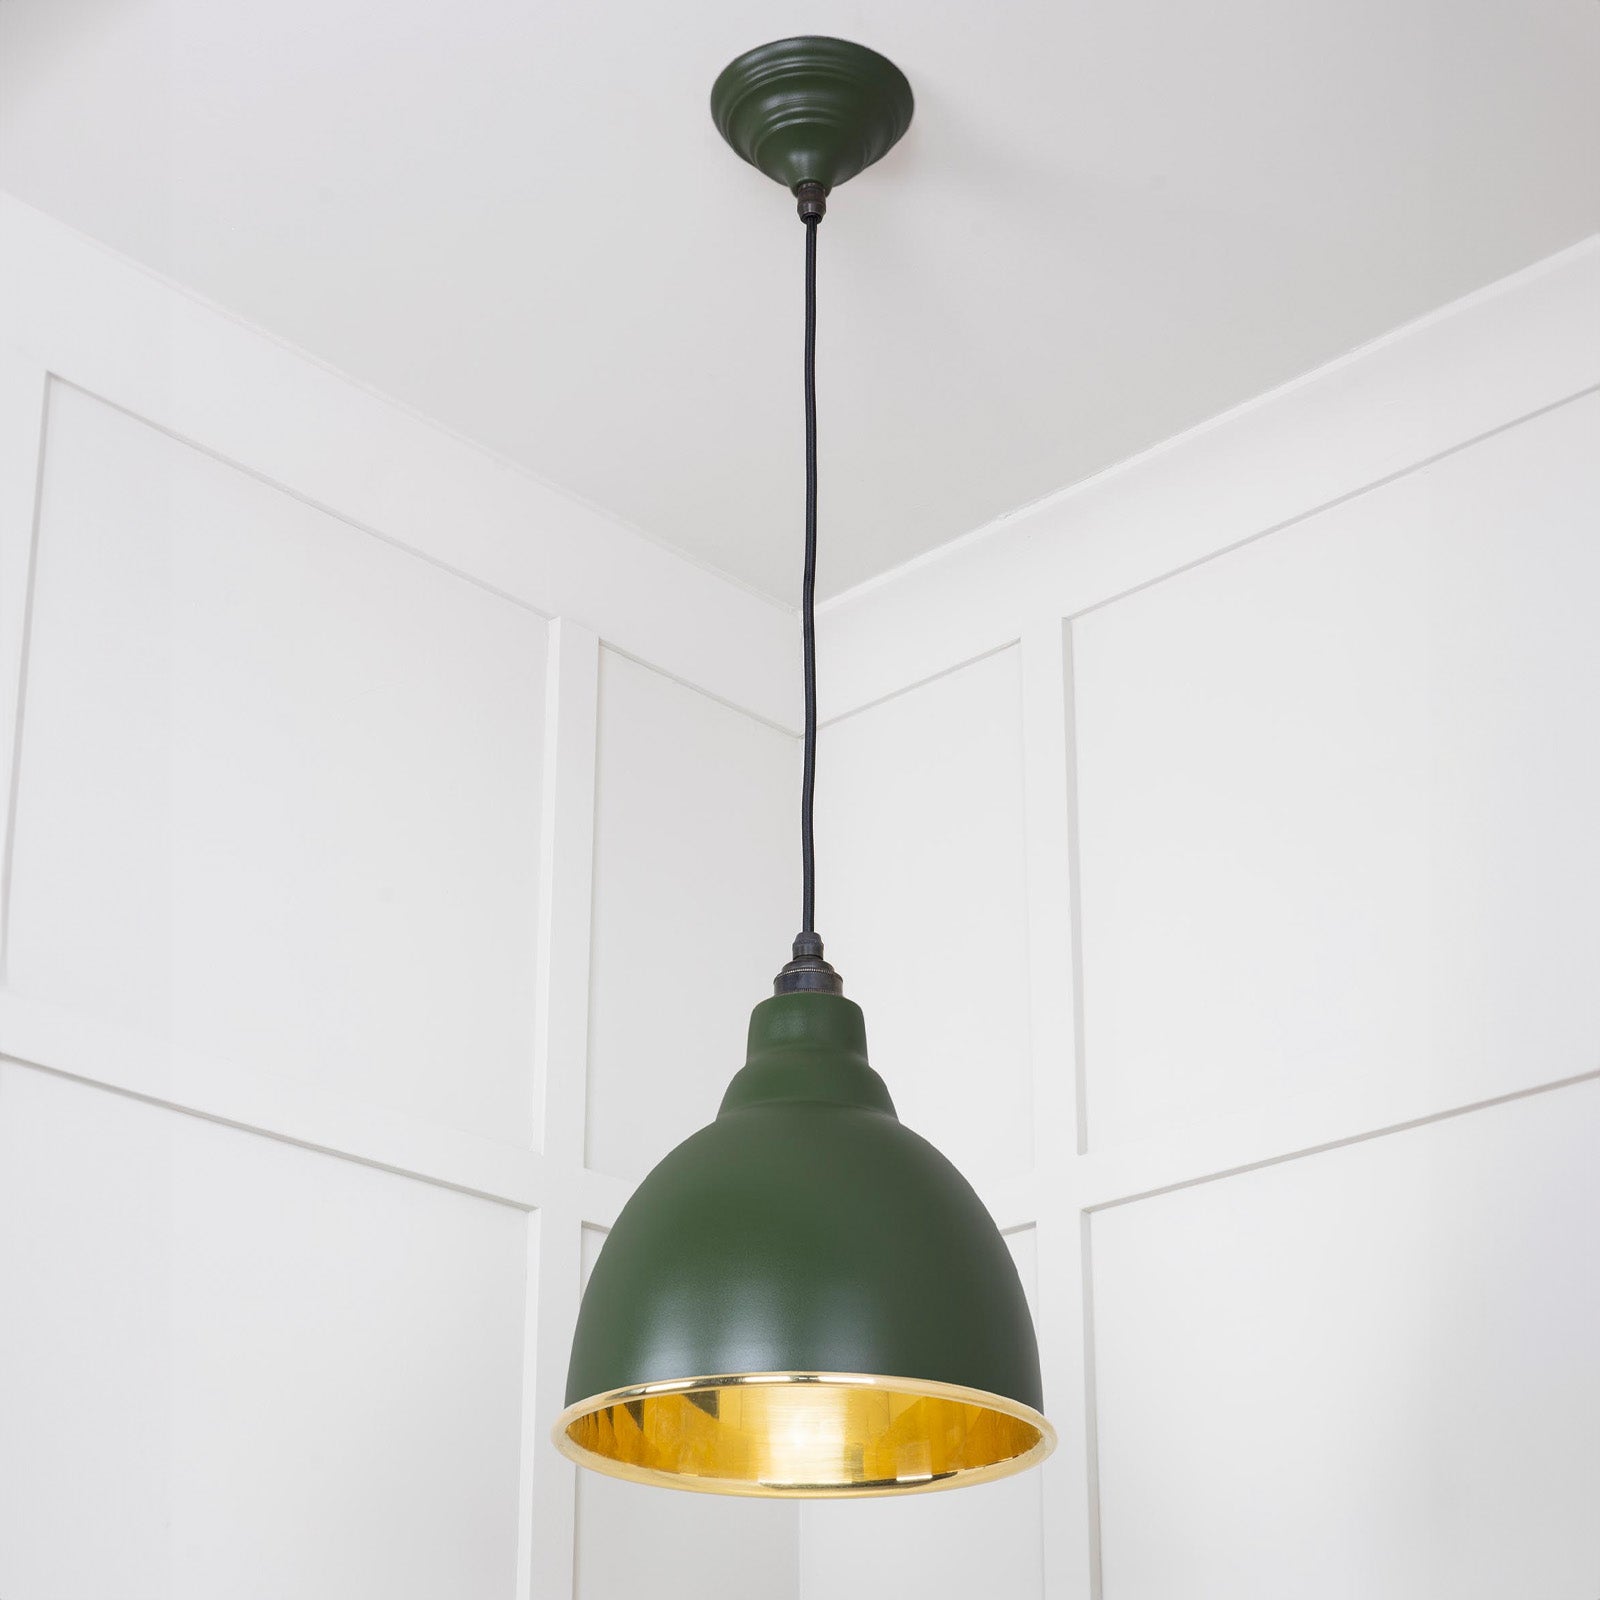 SHOW Full Image of Hanging Brindley Ceiling Light in Heath